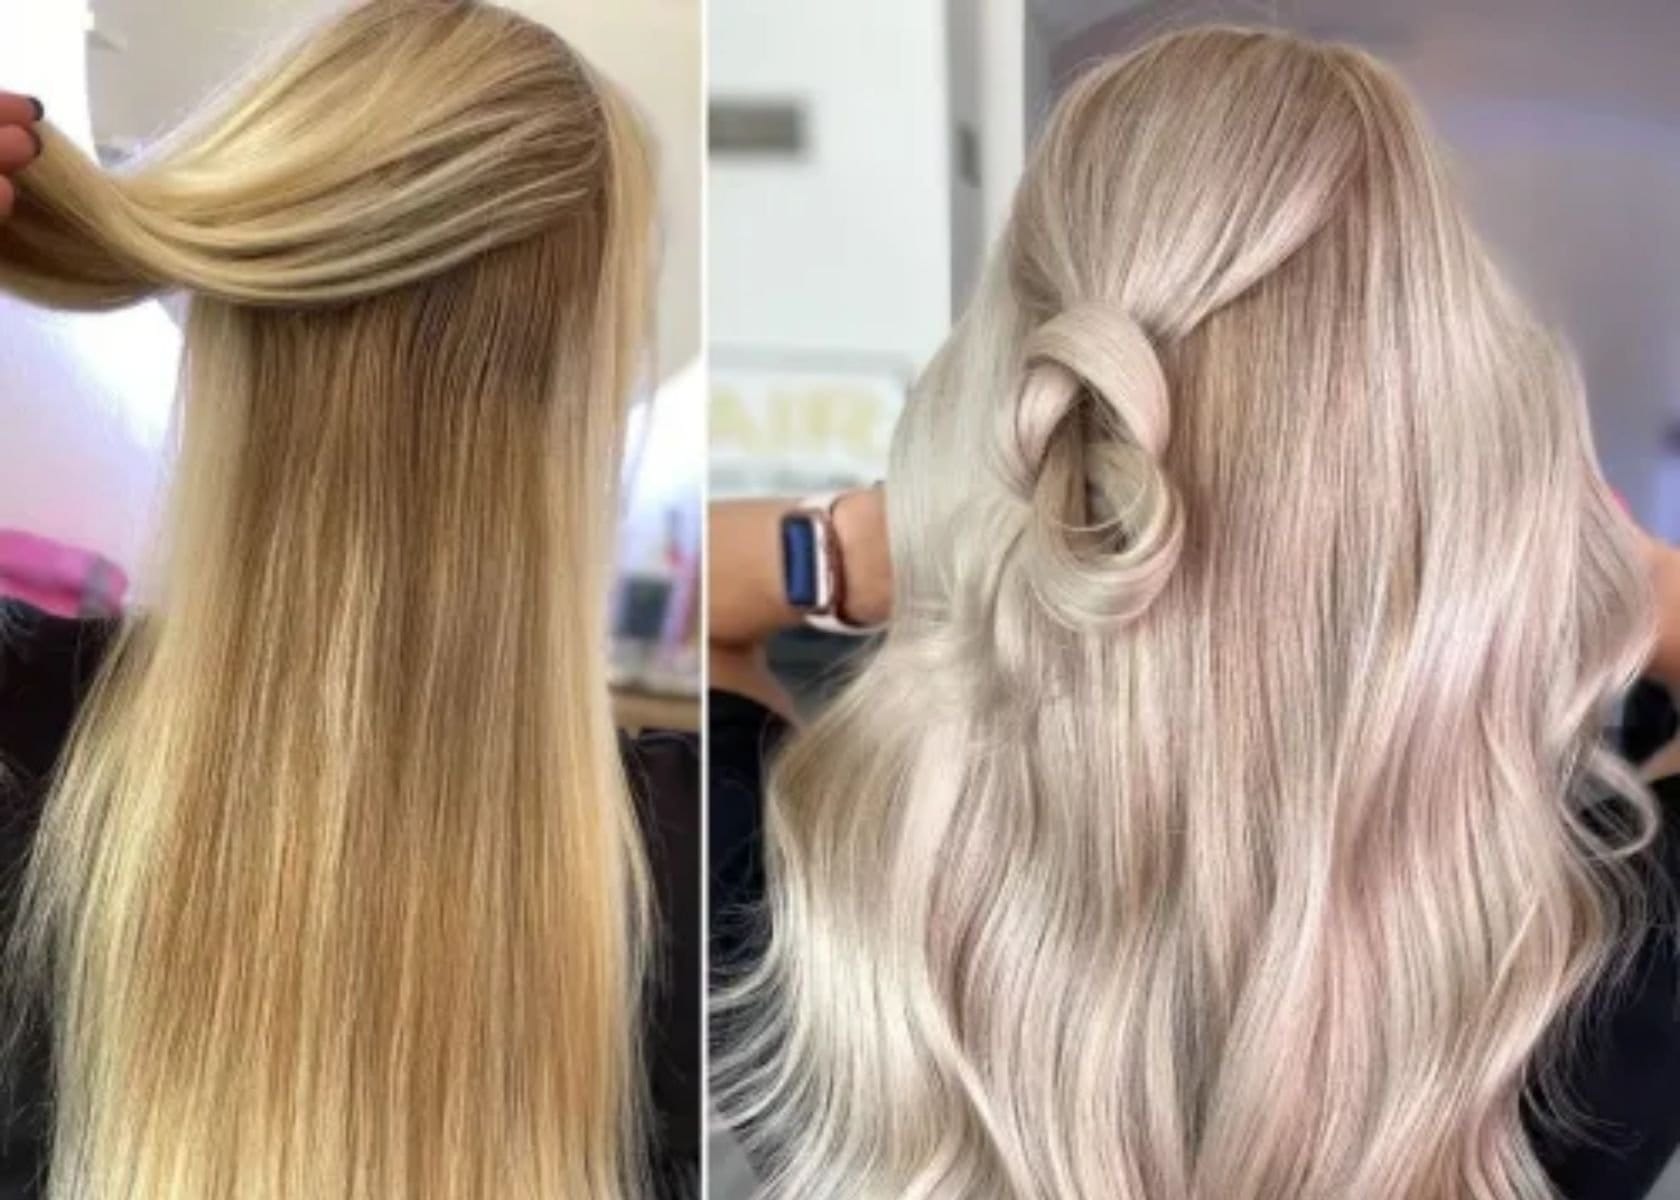 What Are Uneven Bleached Hair?